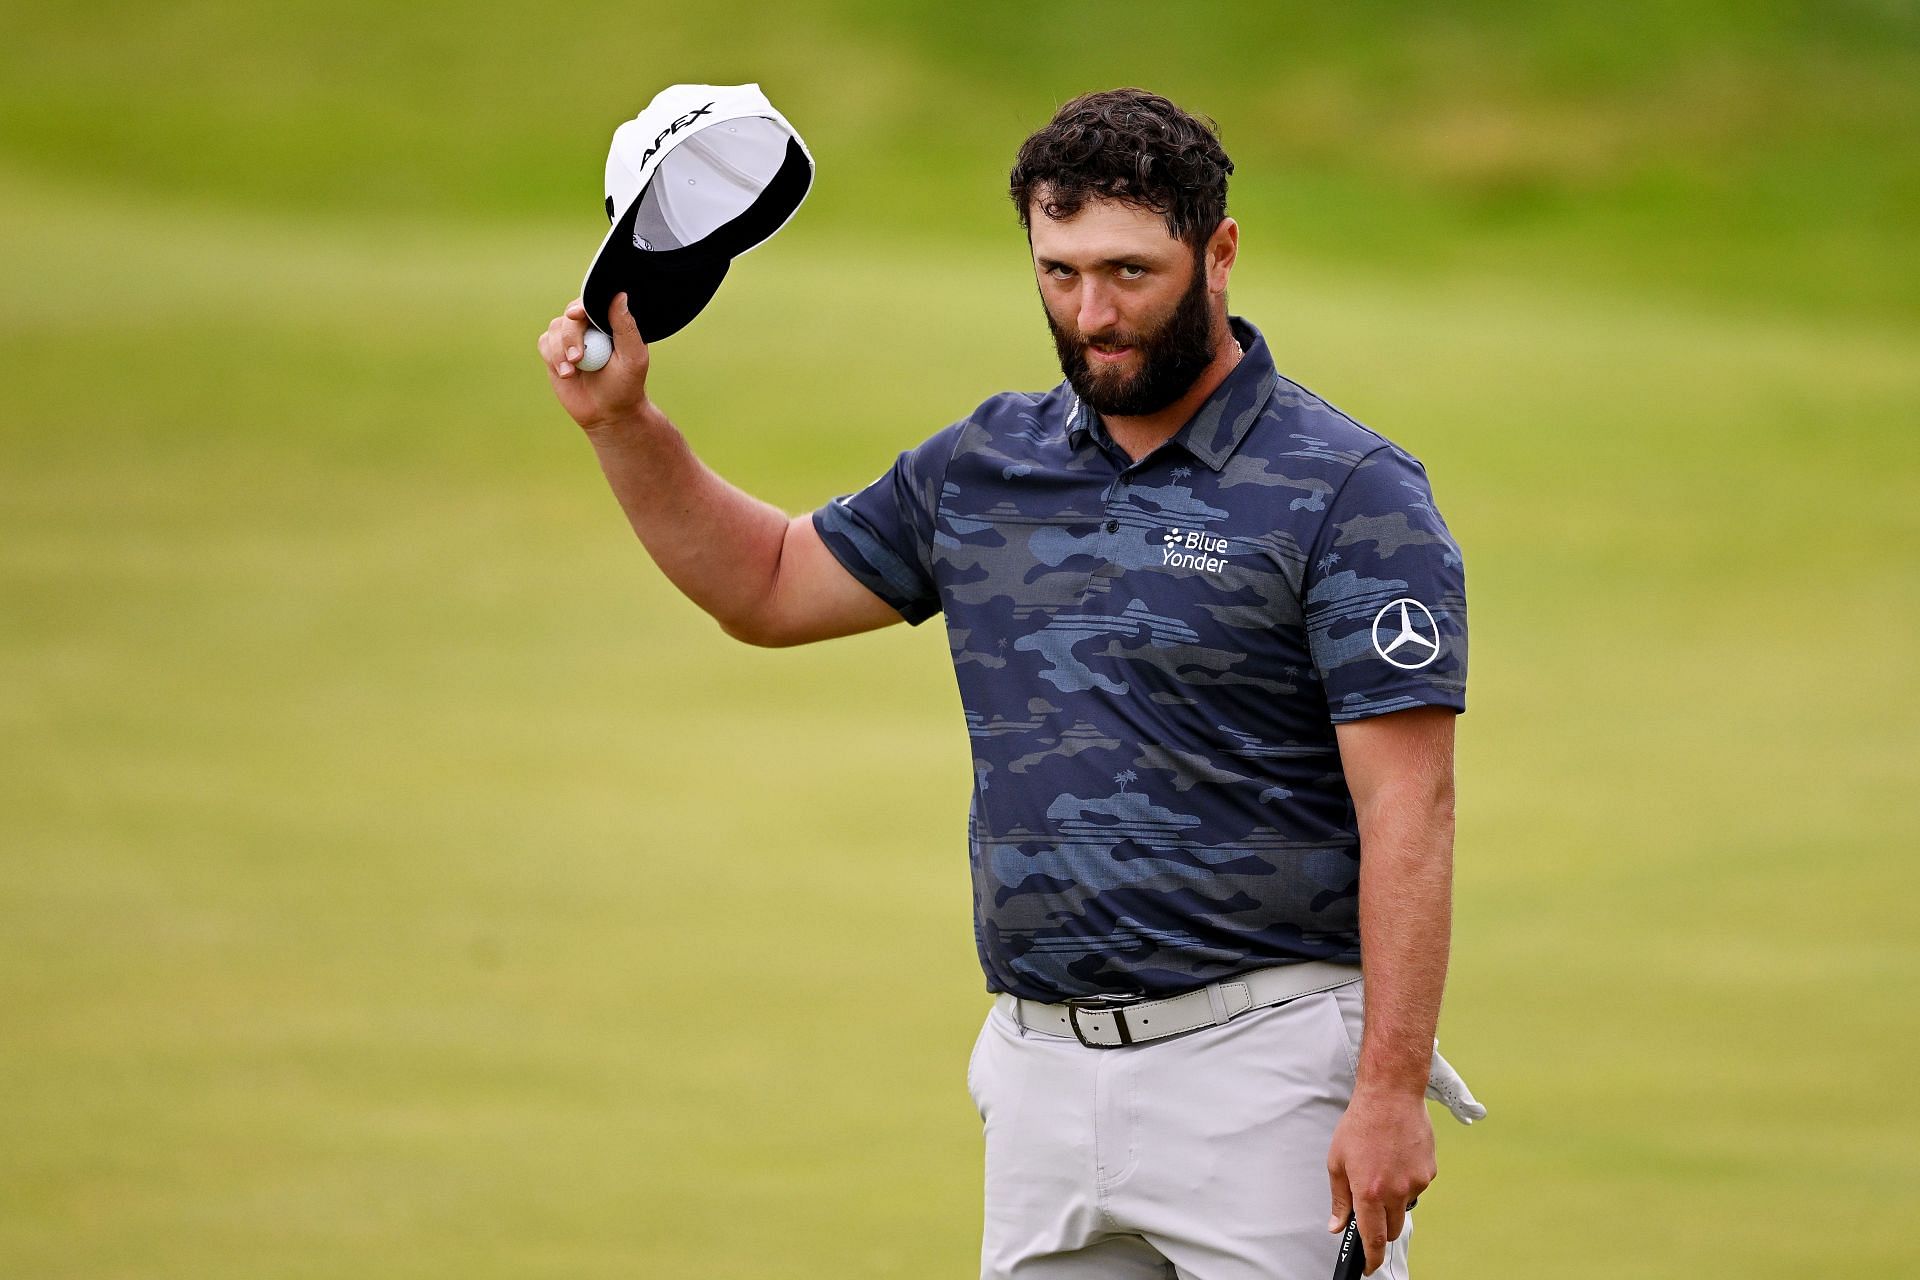 Jon Rahm had an incredible day at the Open Championship 2023